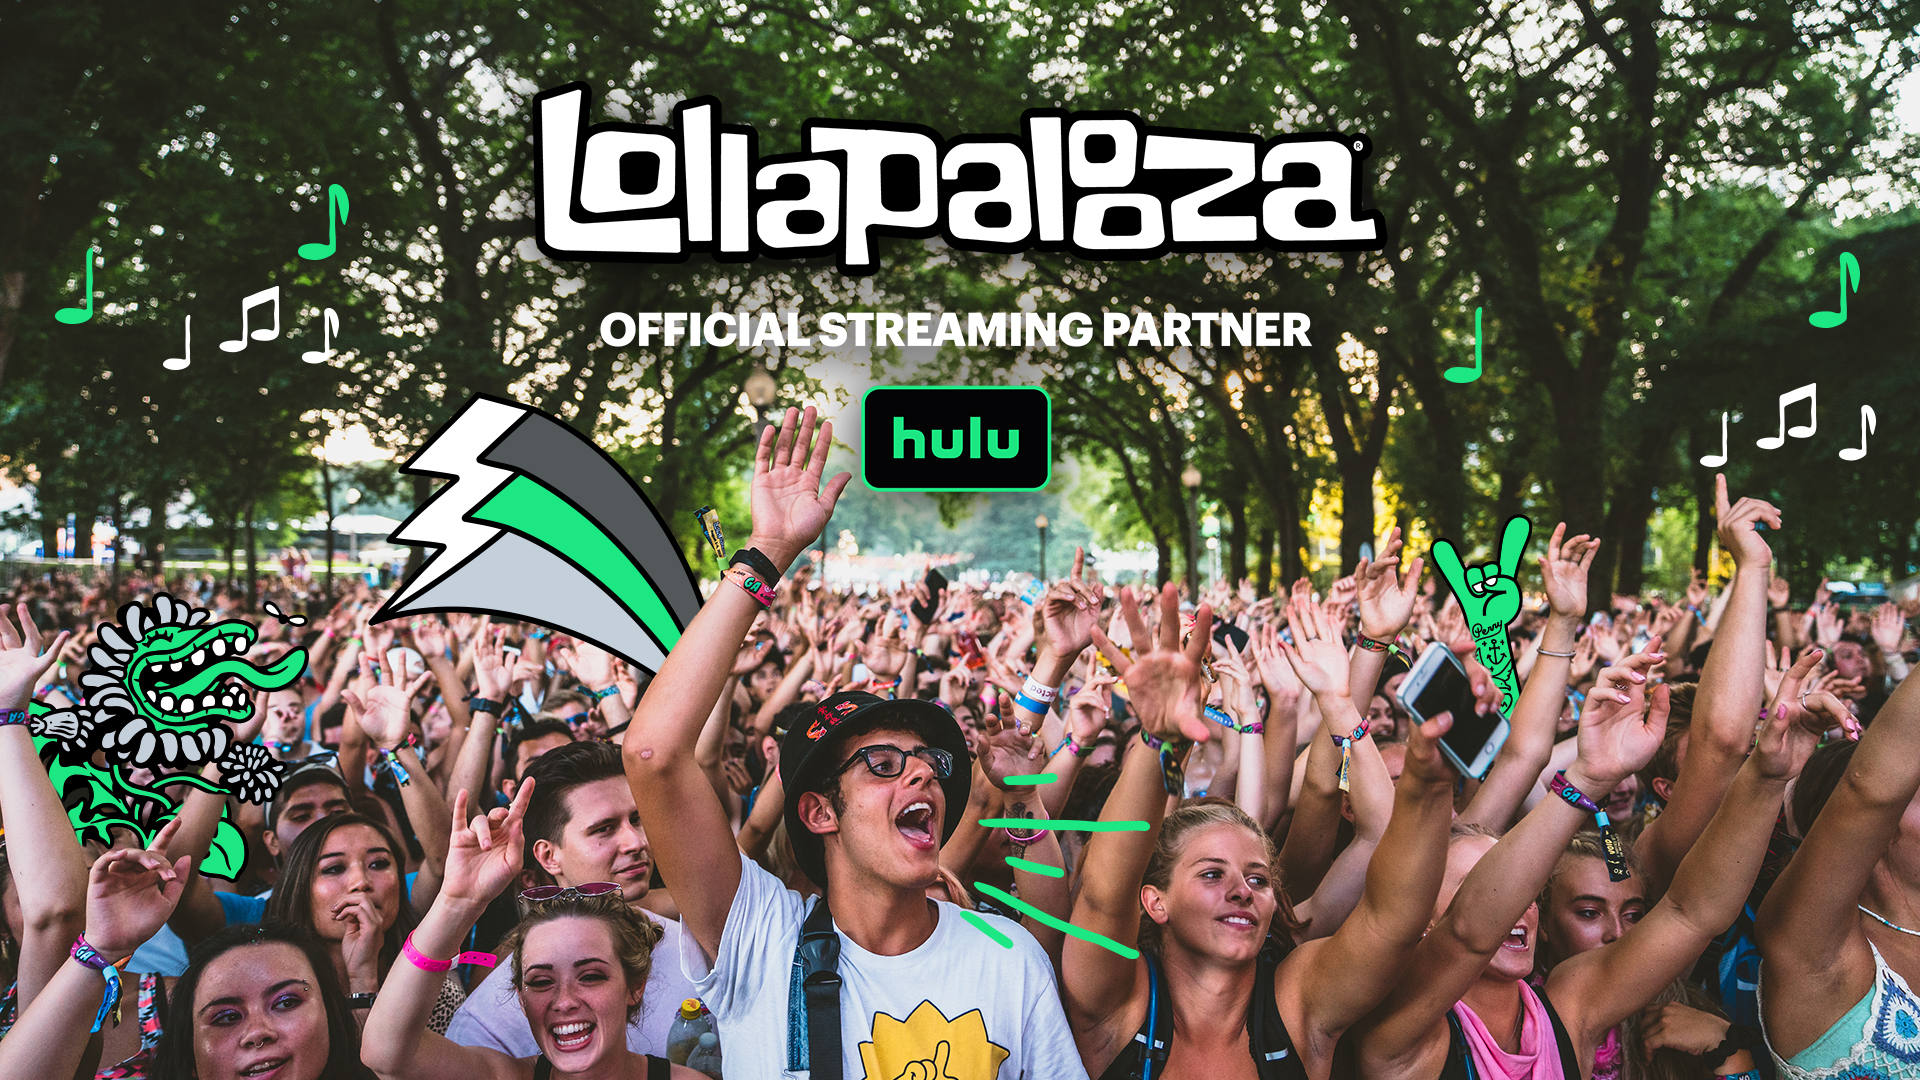 Hulu is the Exclusive Streaming Partner for Lollapalooza 2021